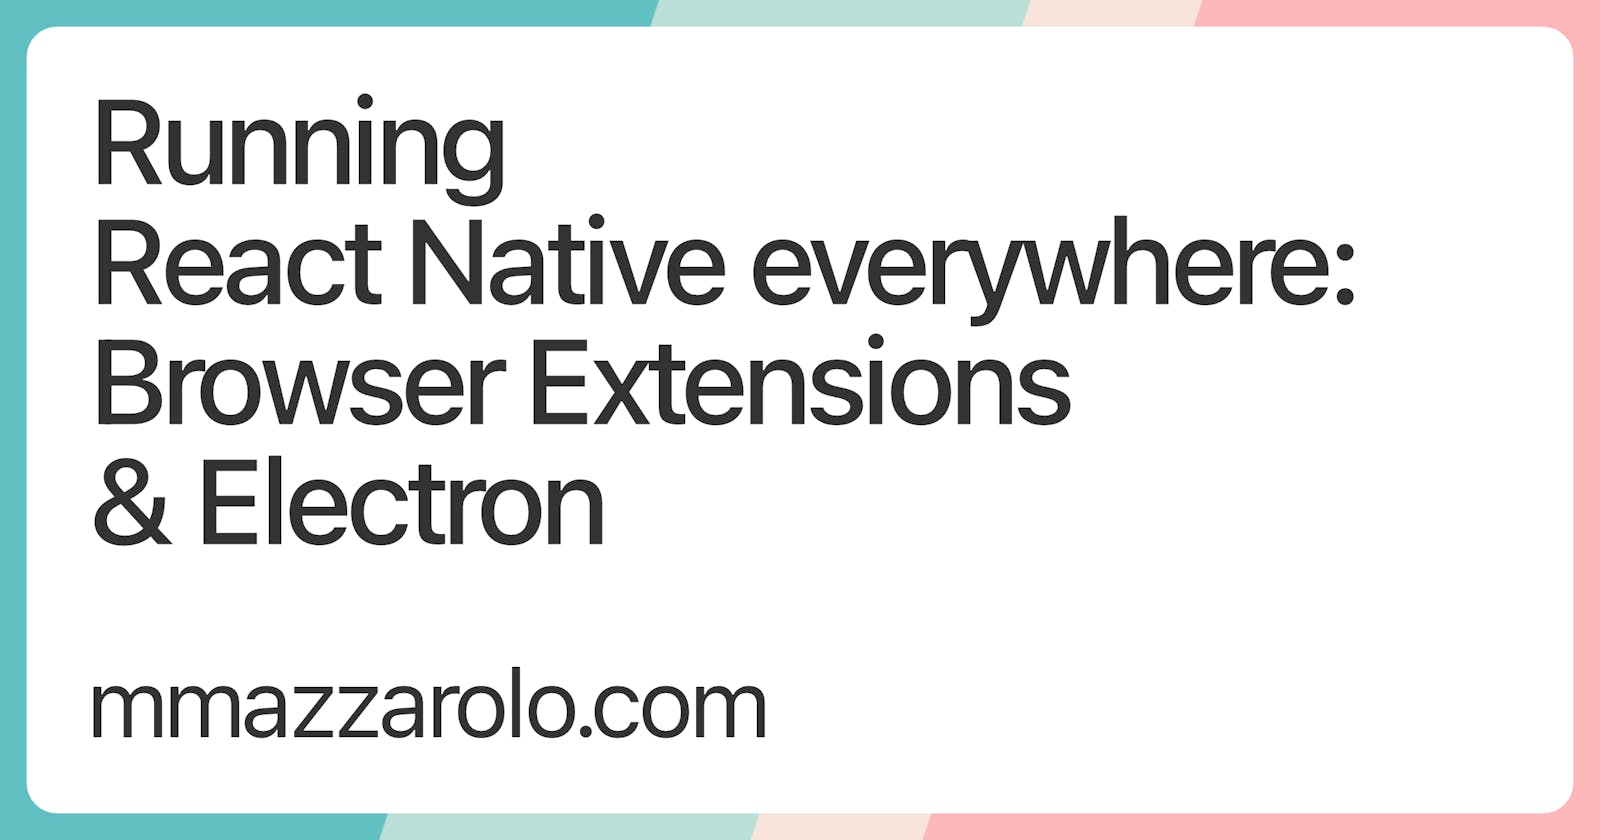 Running React Native everywhere: Browser Extensions & Electron